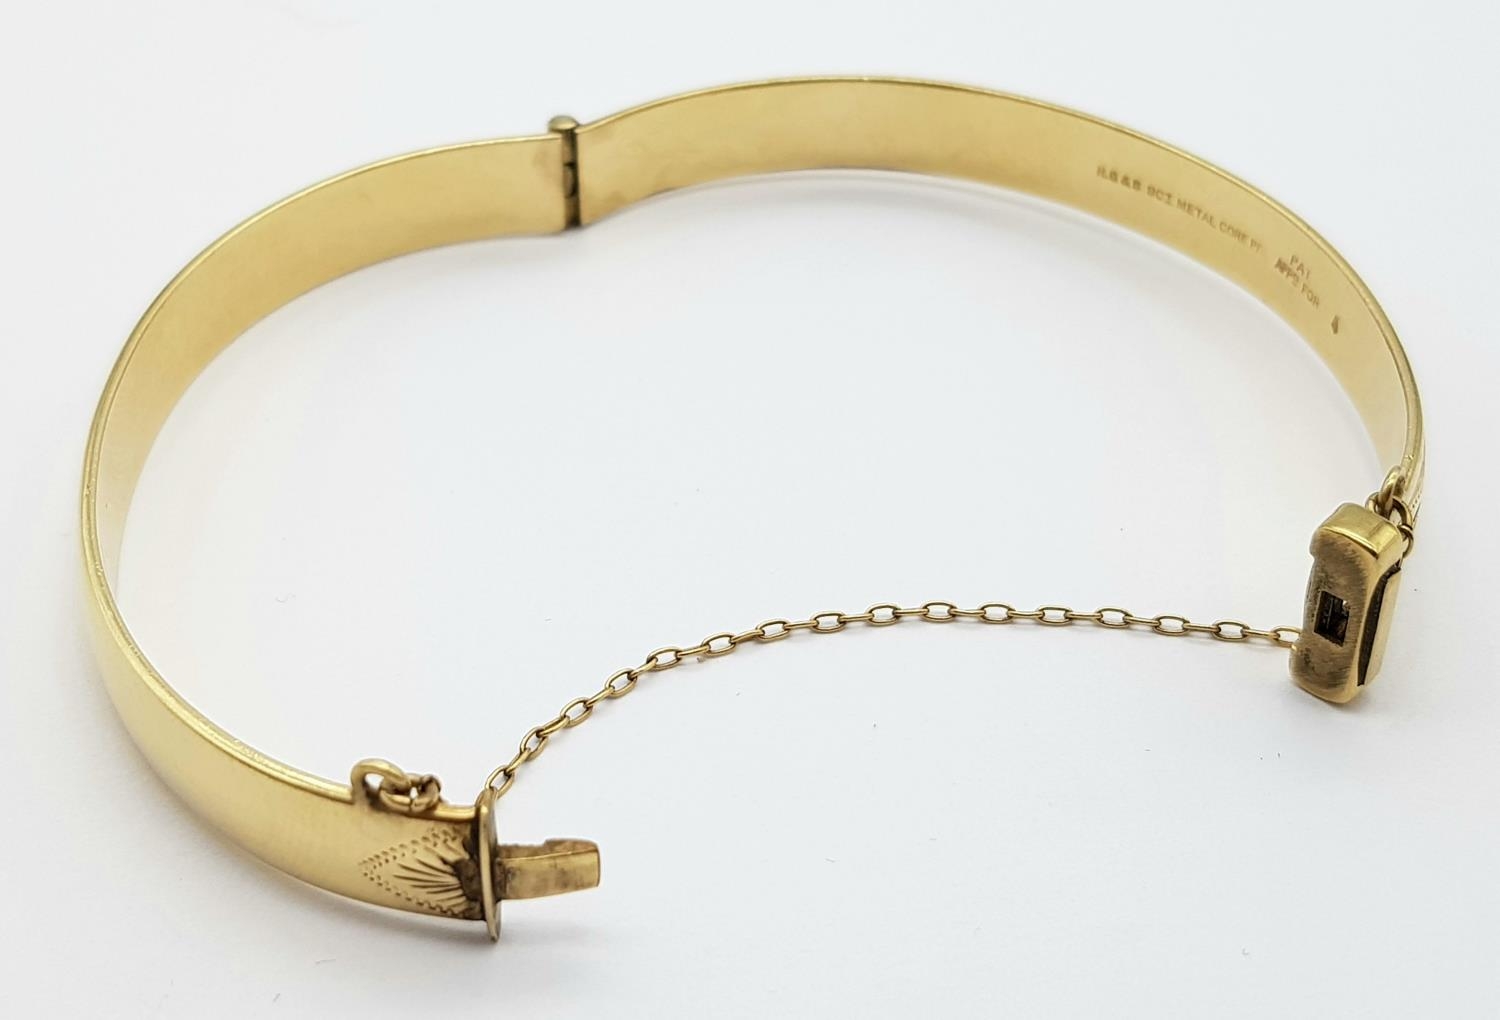 A 9K YELLOW GOLD AND METAL CORE ENGARVED BANGLE 18.3G , 53mm x 60mm diameter. ref: ADAM 9001 - Image 4 of 5